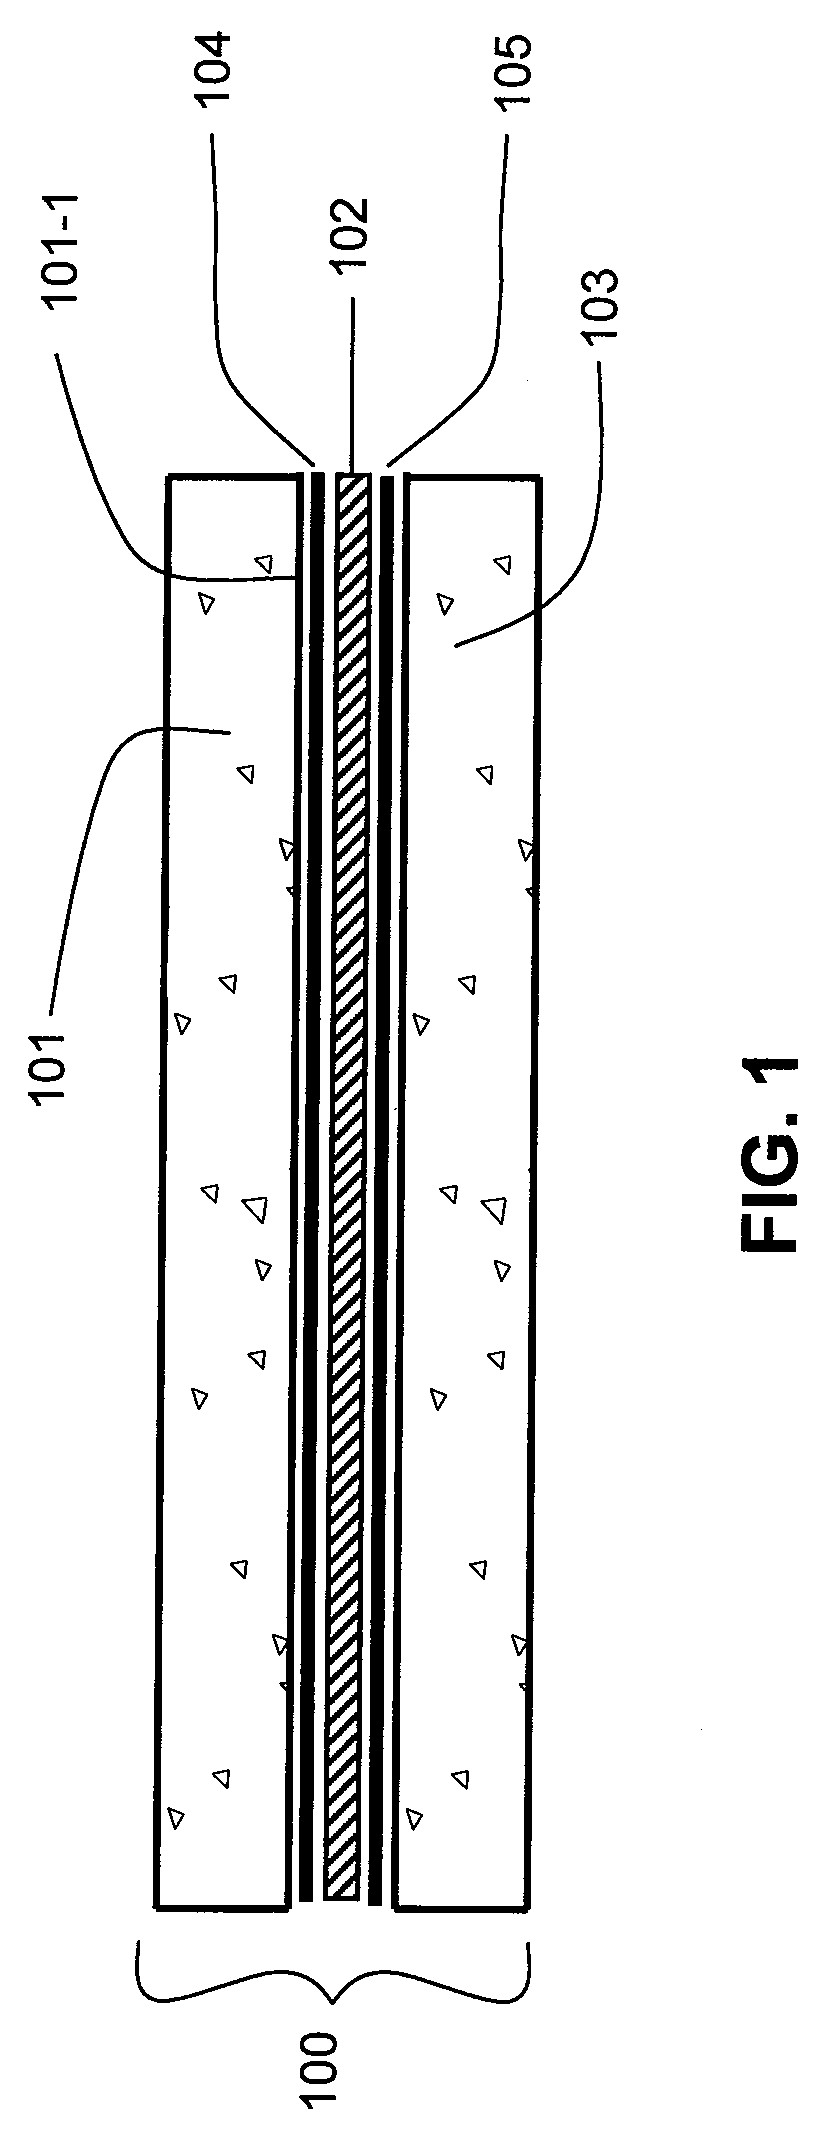 Acoustical sound proofing material with improved damping at select frequencies and methods for manufacturing same